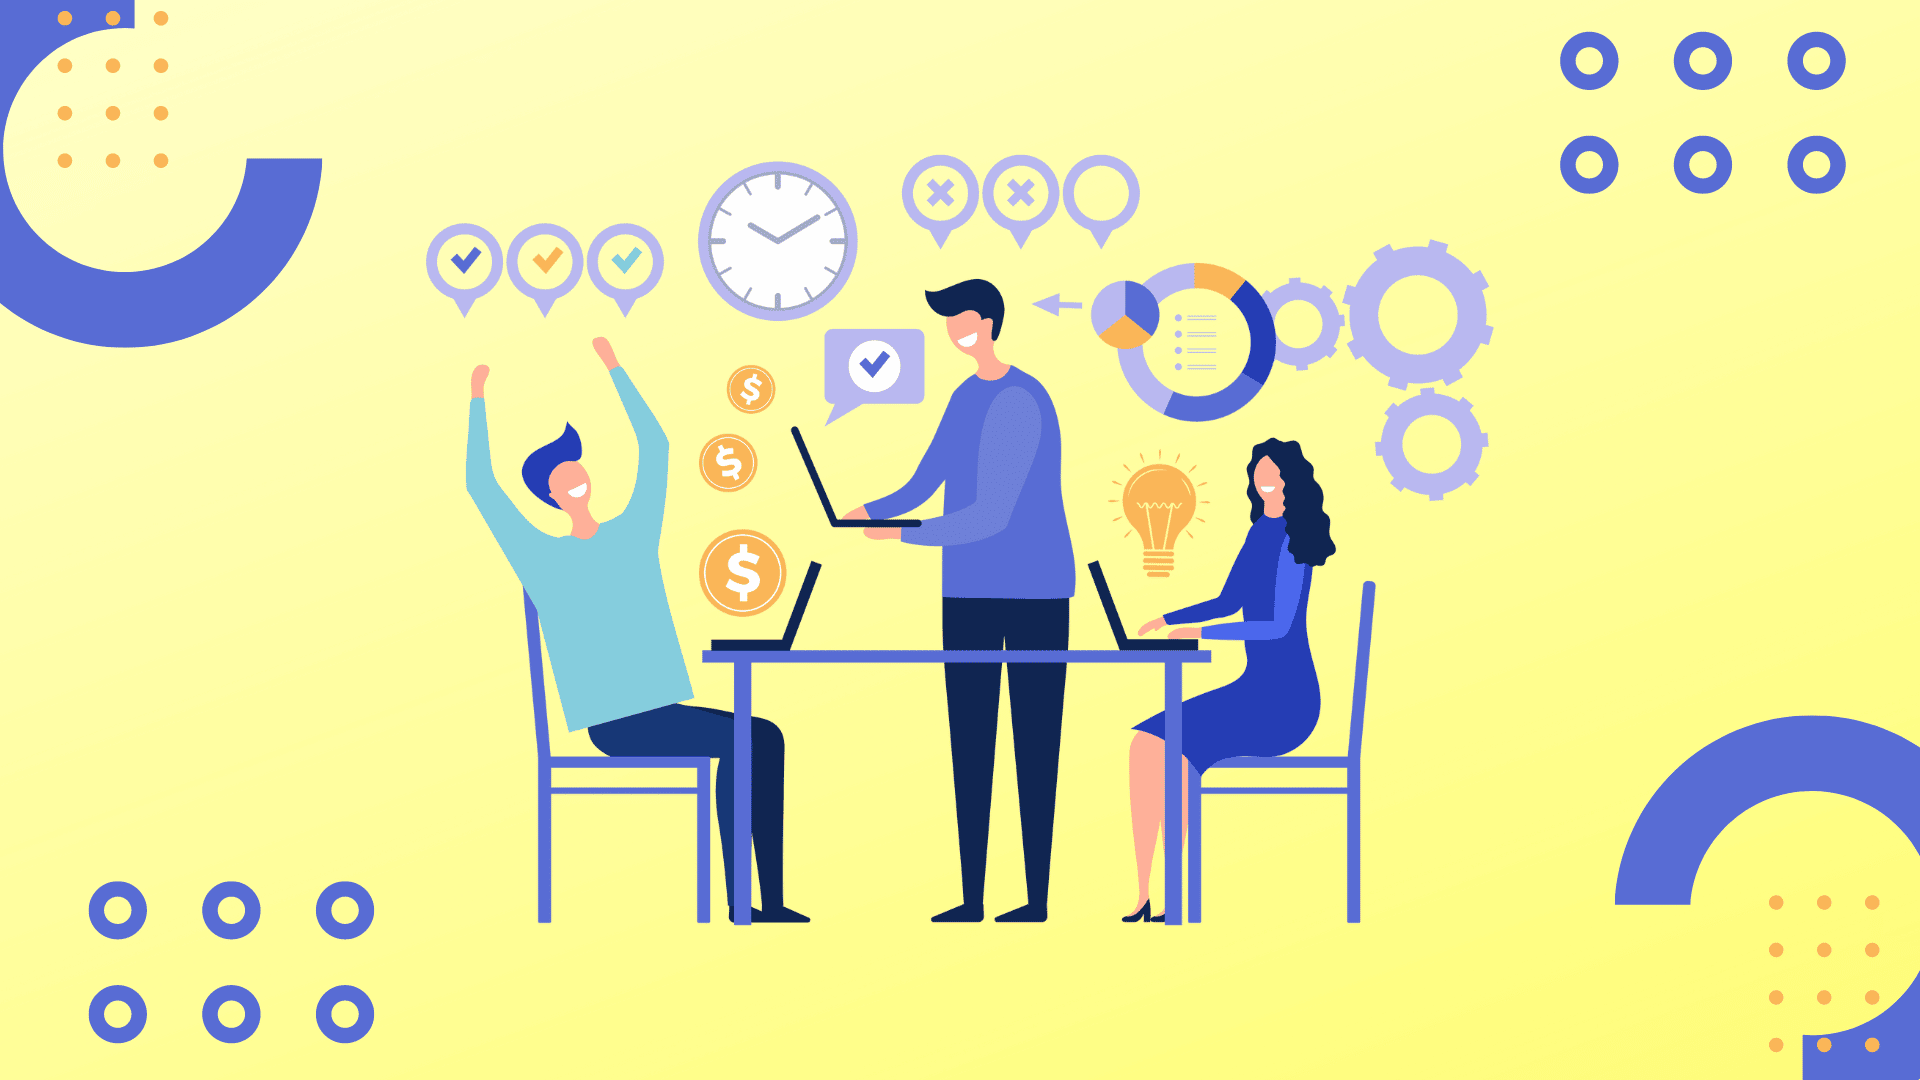 Allowing you to collaborate better with your team